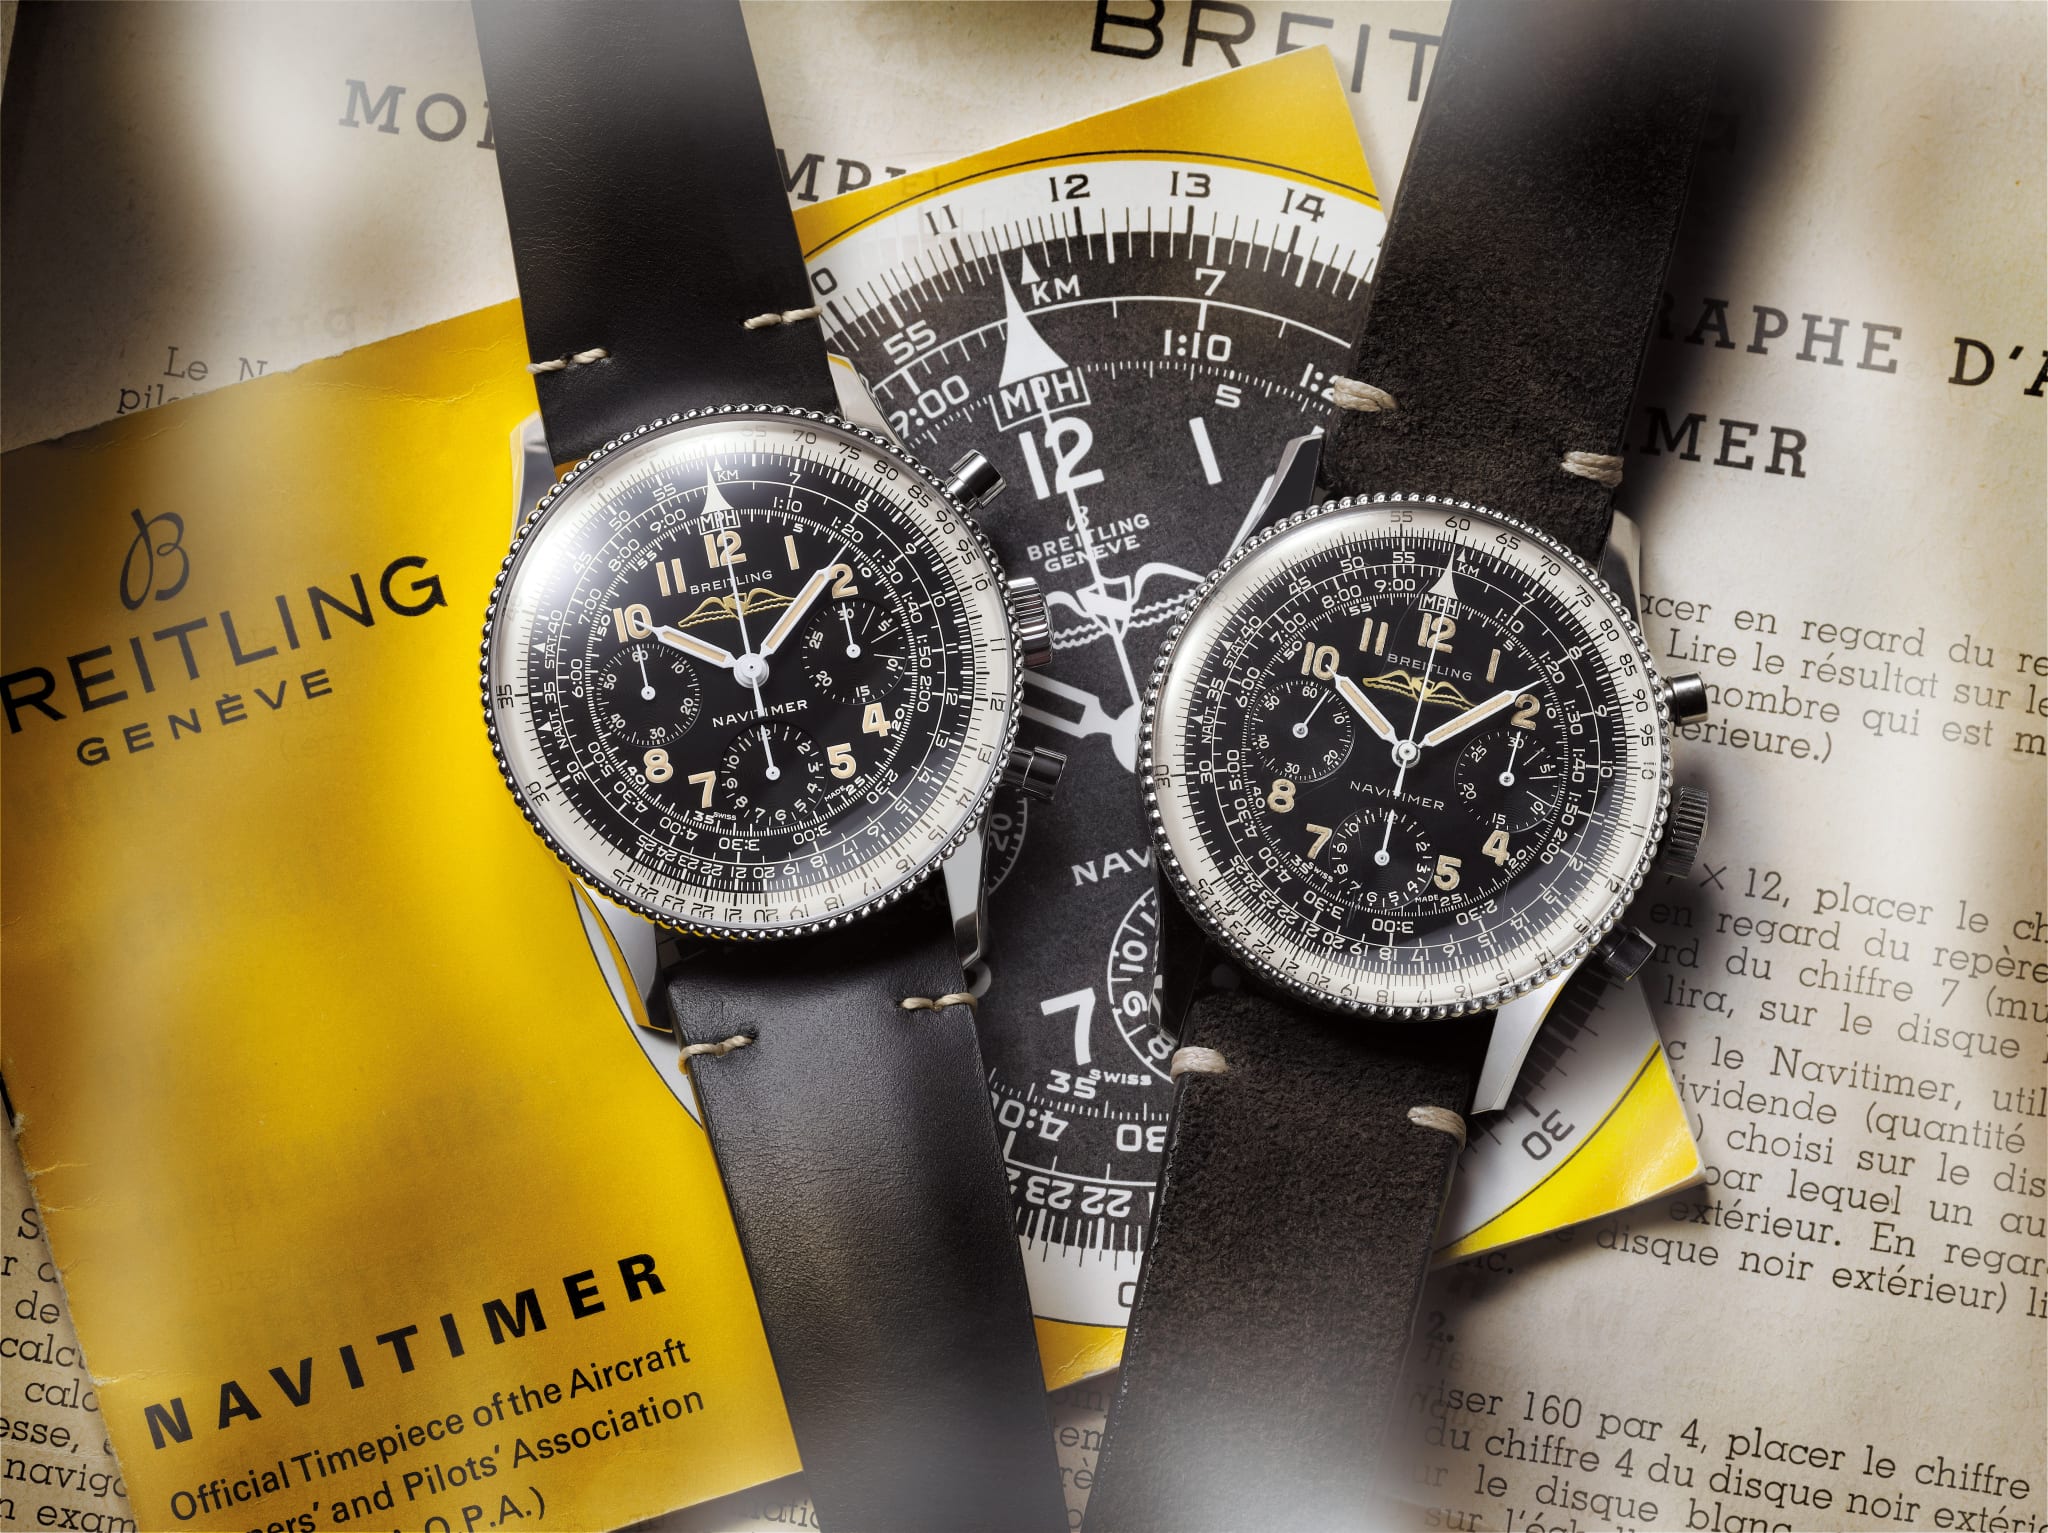 02 navitimer ref. 806 1959 re edition and the historical navitimer ref. 806 from 1959 left to right 21694 14 03 19